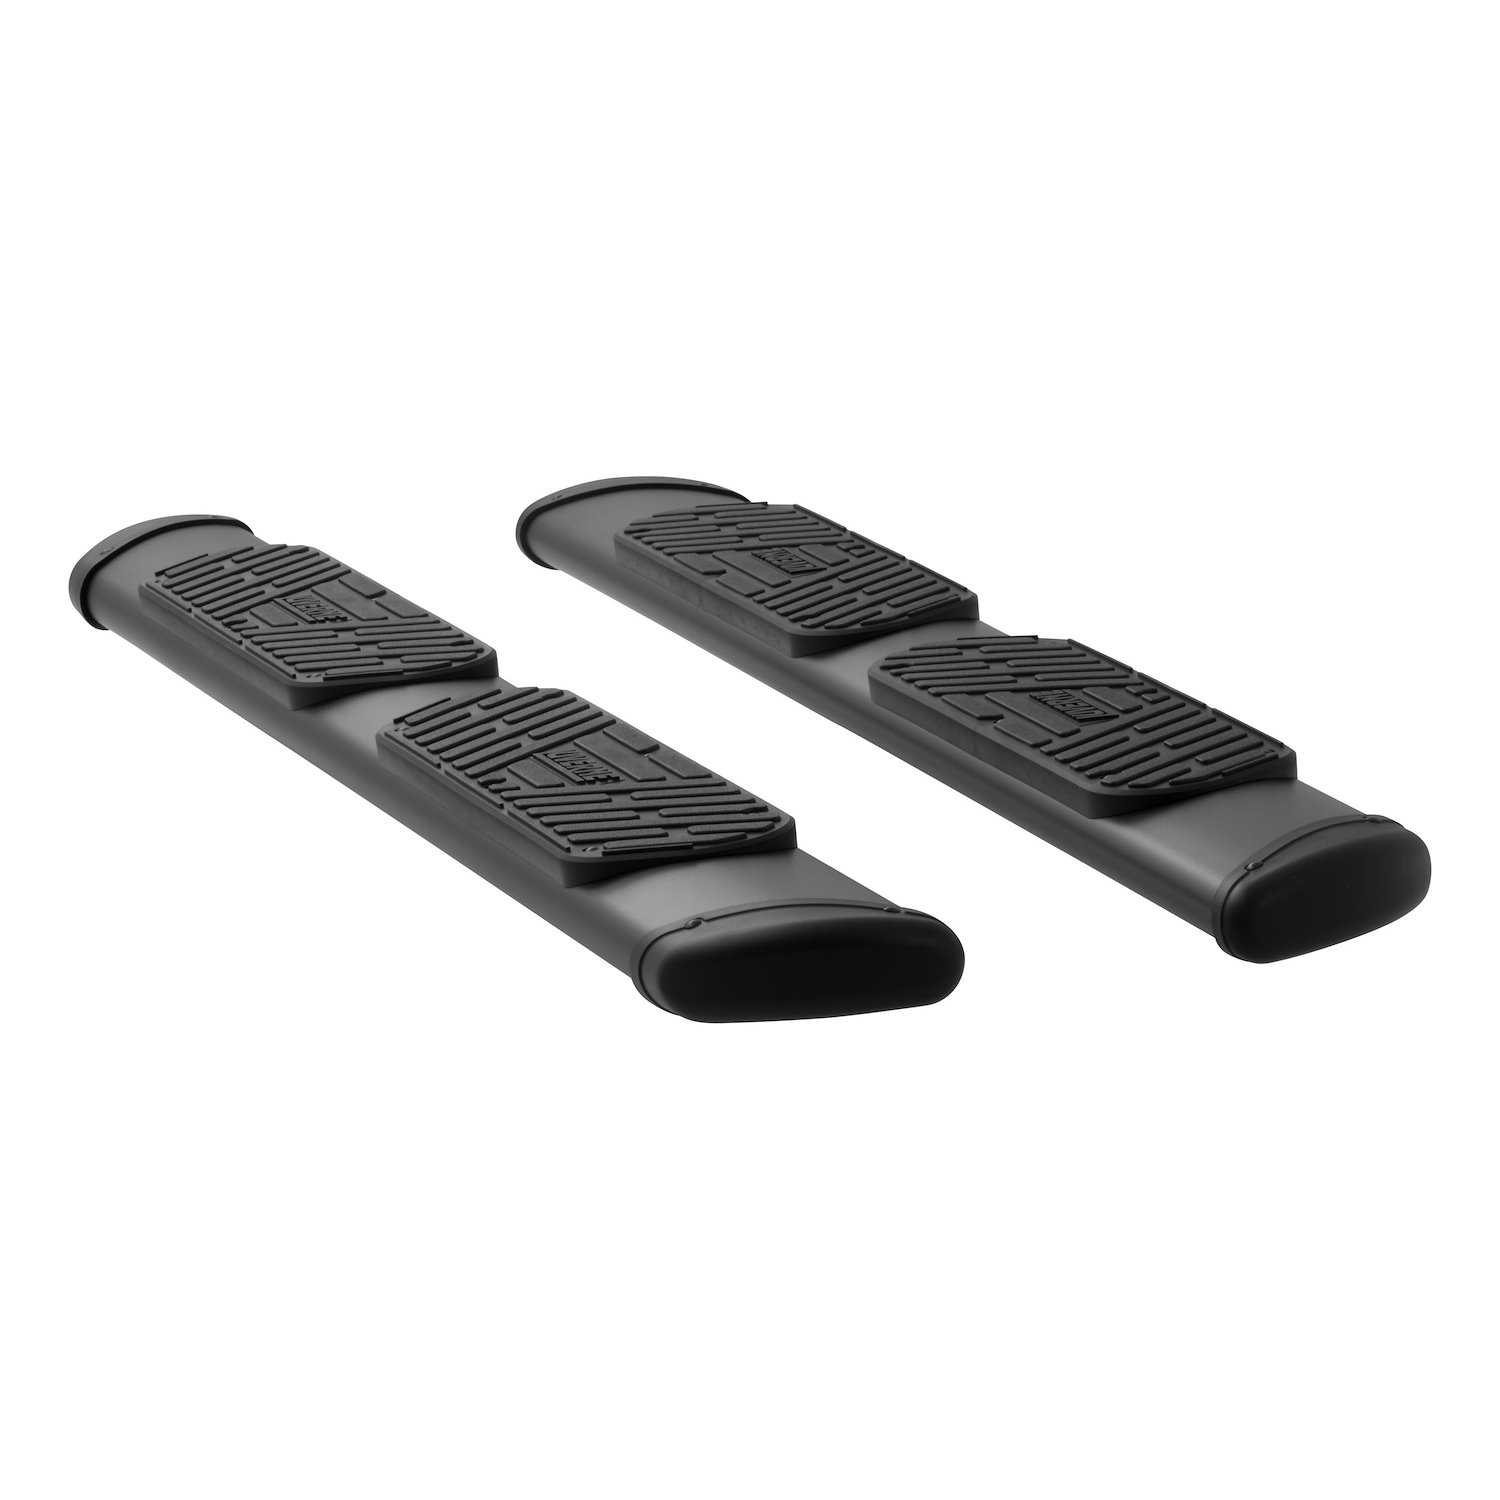 277078-401232 Regal 7 Black Stainless 78 in. Oval Side Steps Fits Select Dodge, Ram 1500 Quad Cab